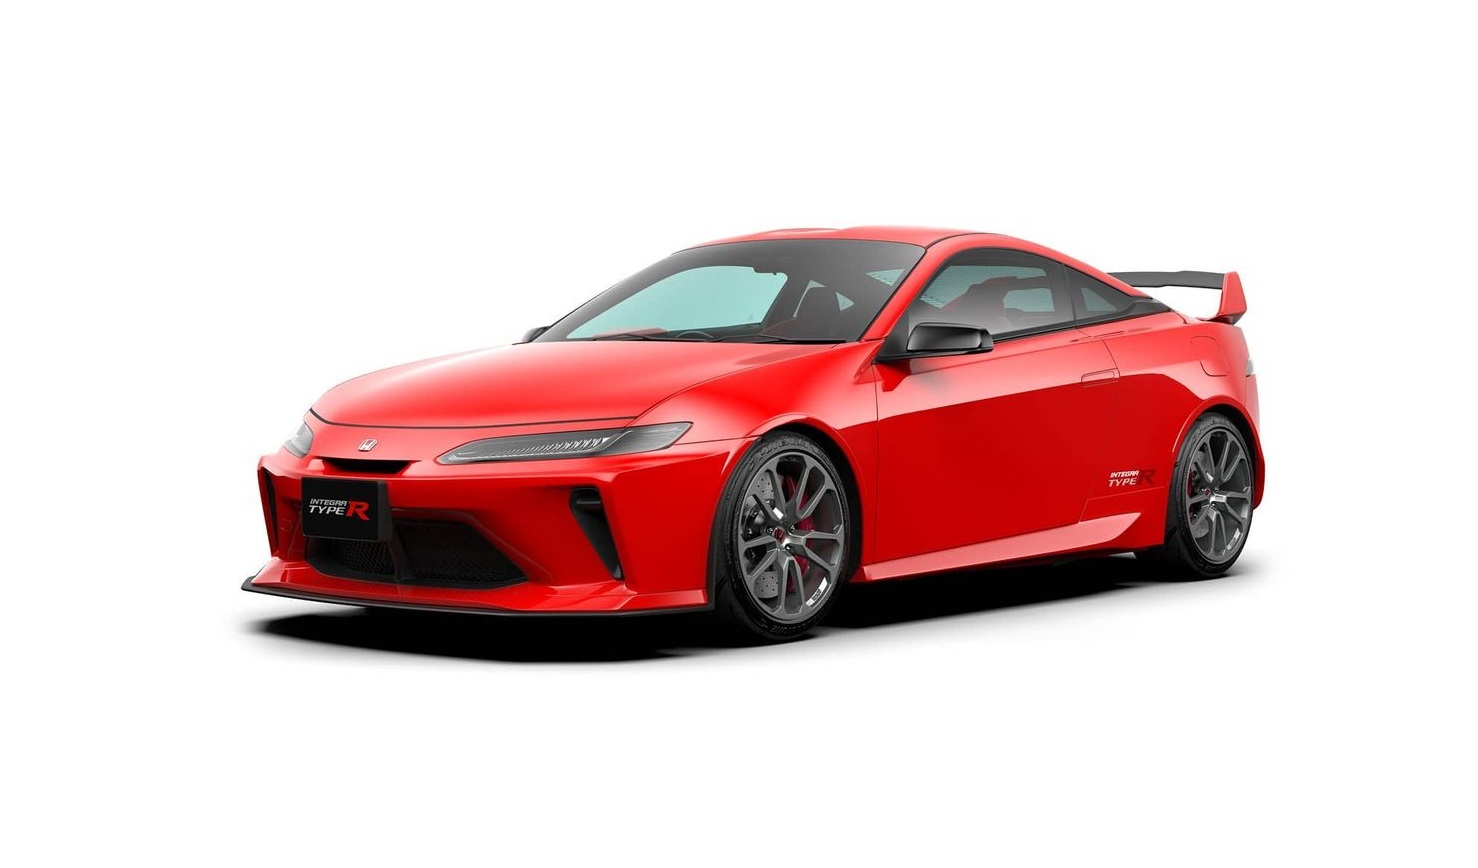 Modern Honda Integra Type R Rendering Joins N A Engine With Manual Transmission